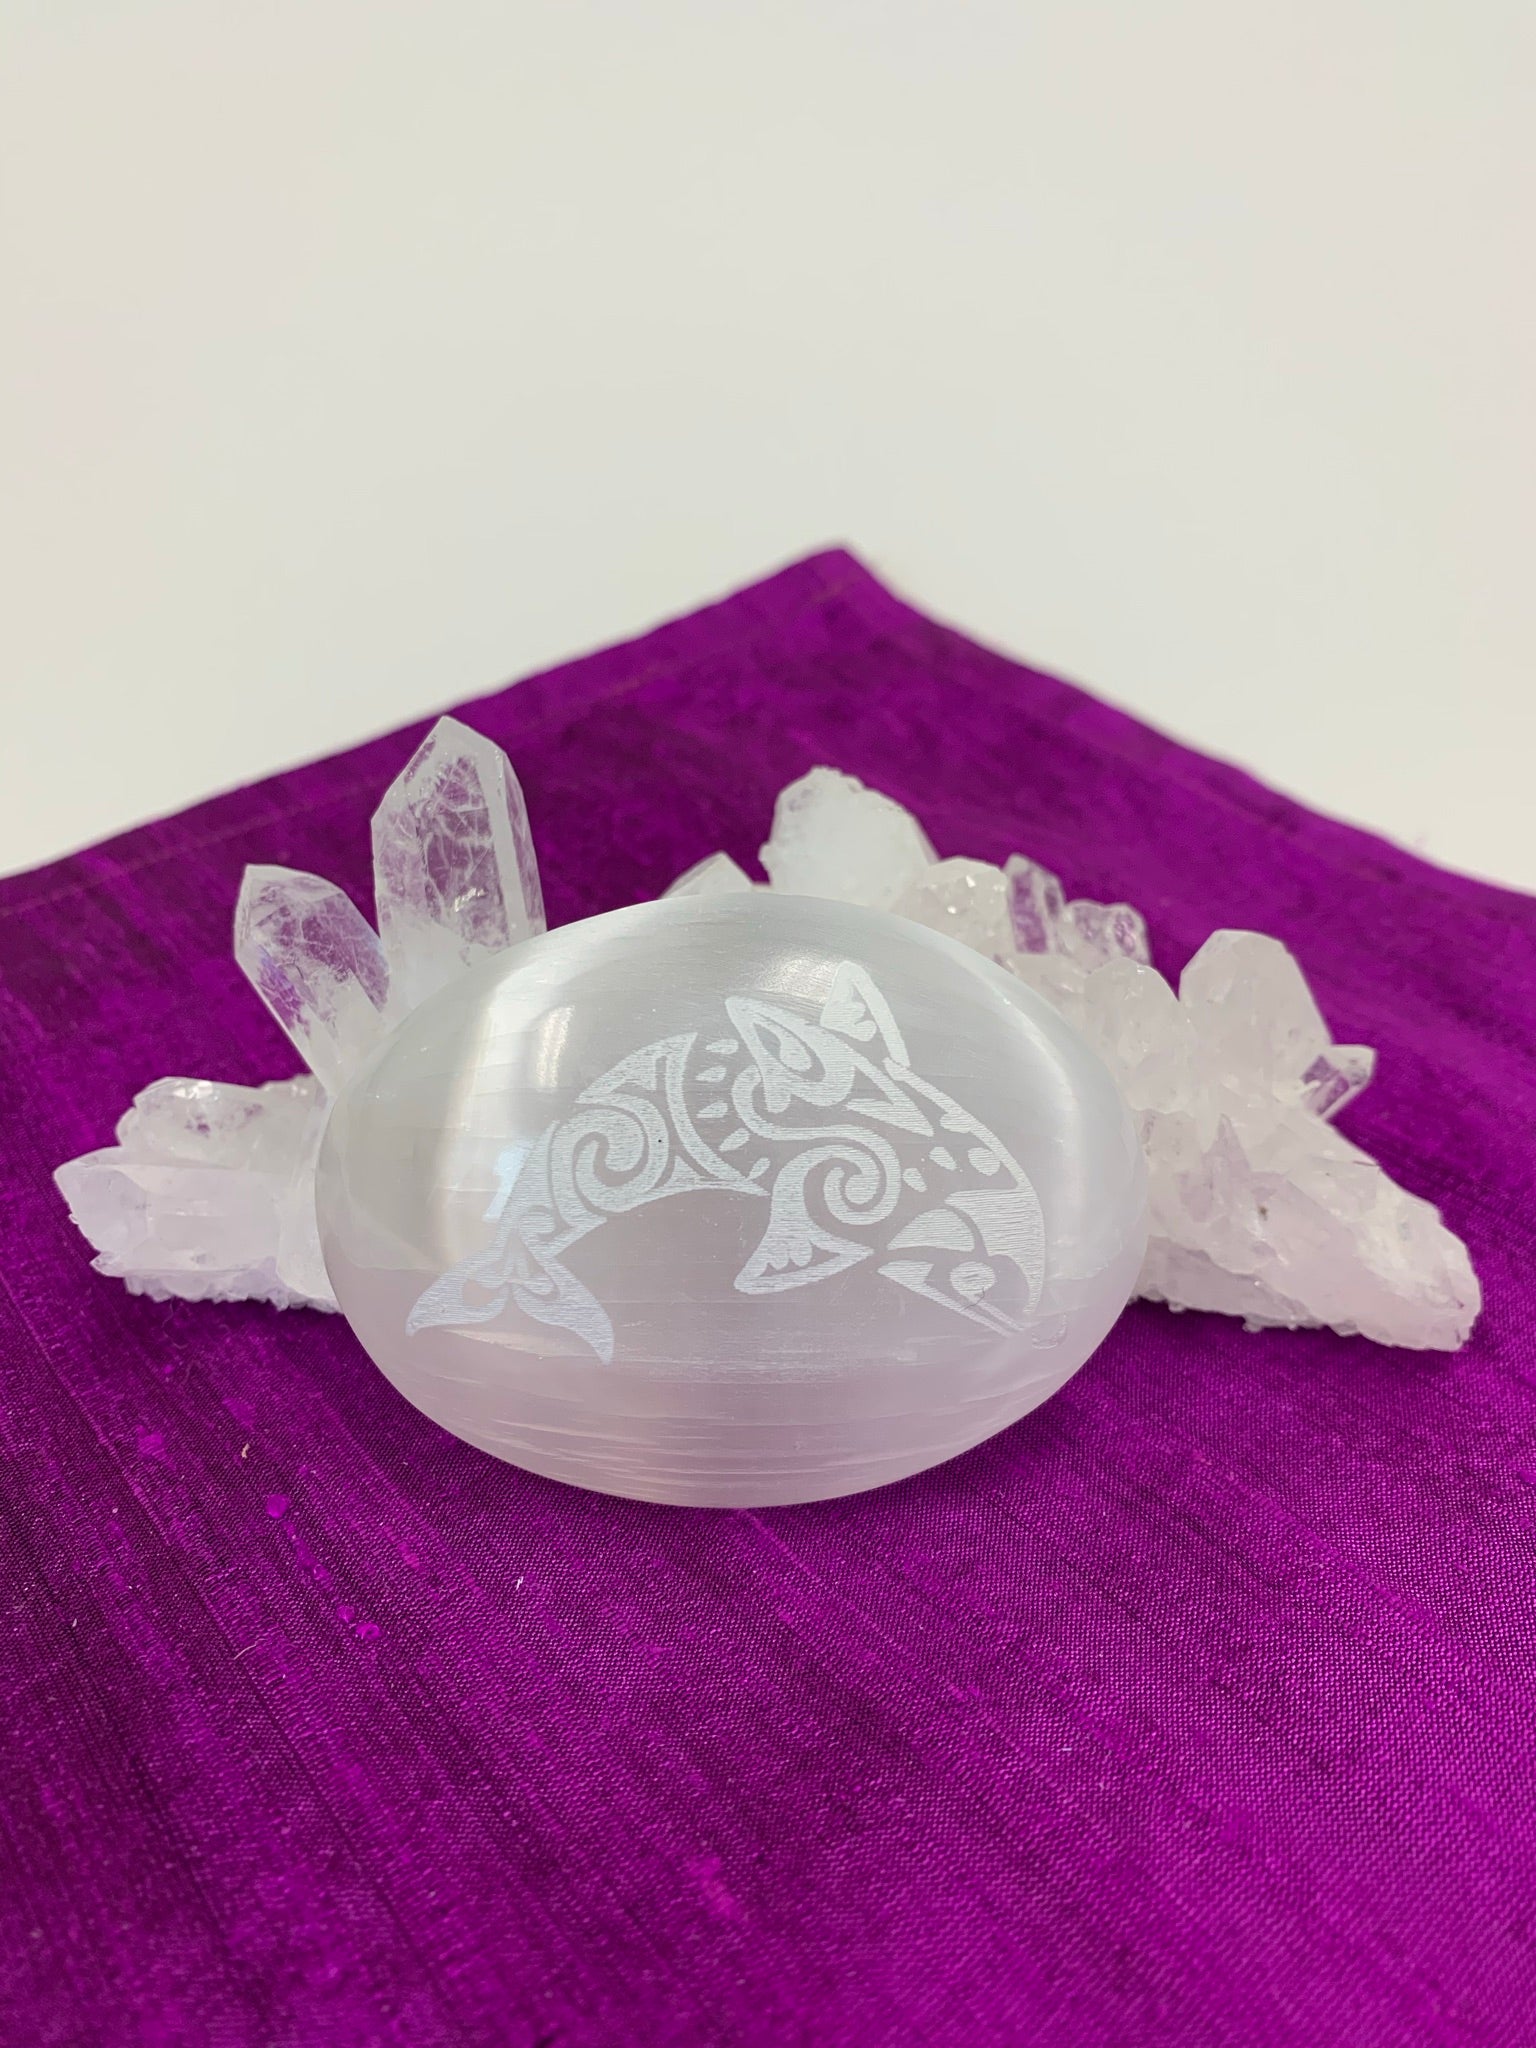 Etched dolphin on smooth, polished, white selenite palm stone. Selenite ranges from translucent to milky white. This selenite is ethically sourced and workers receive living wages.  Dolphin represents breath and playfulness and joy.